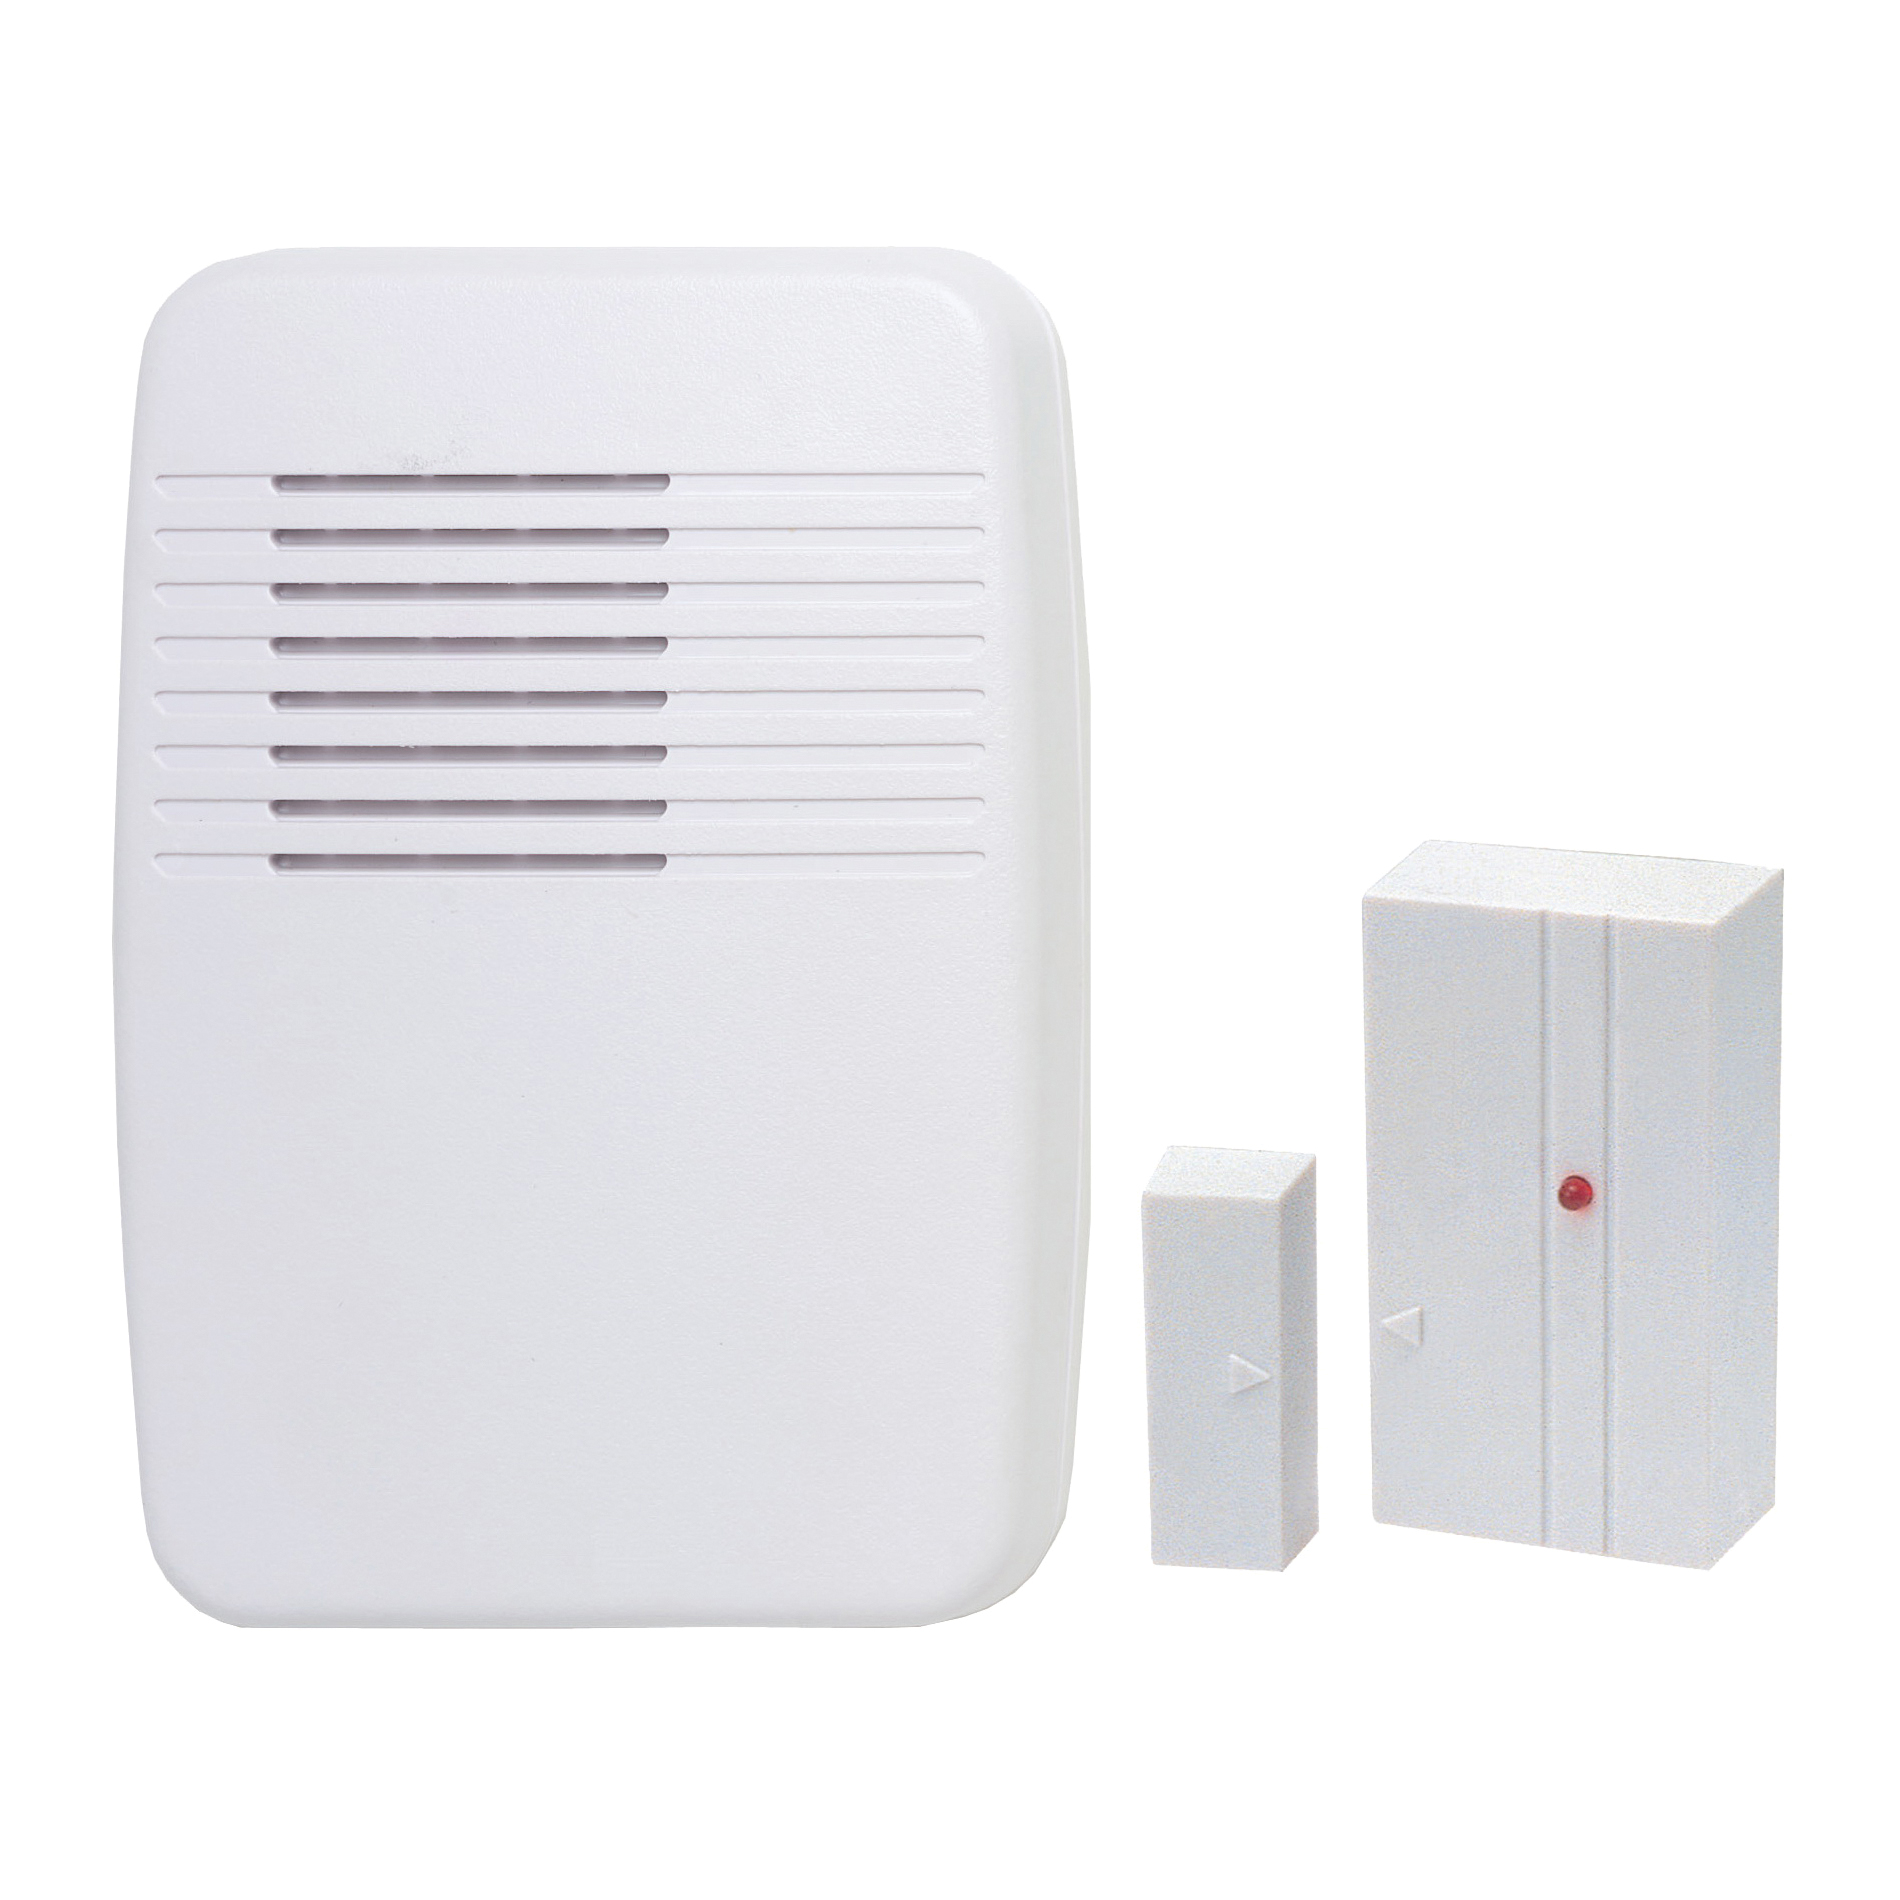 Heath Zenith SL-7368-02 Entry Alert Kit, Wireless, Ding, Ding-Dong, Westminster Tone, 75 dB, White - 1